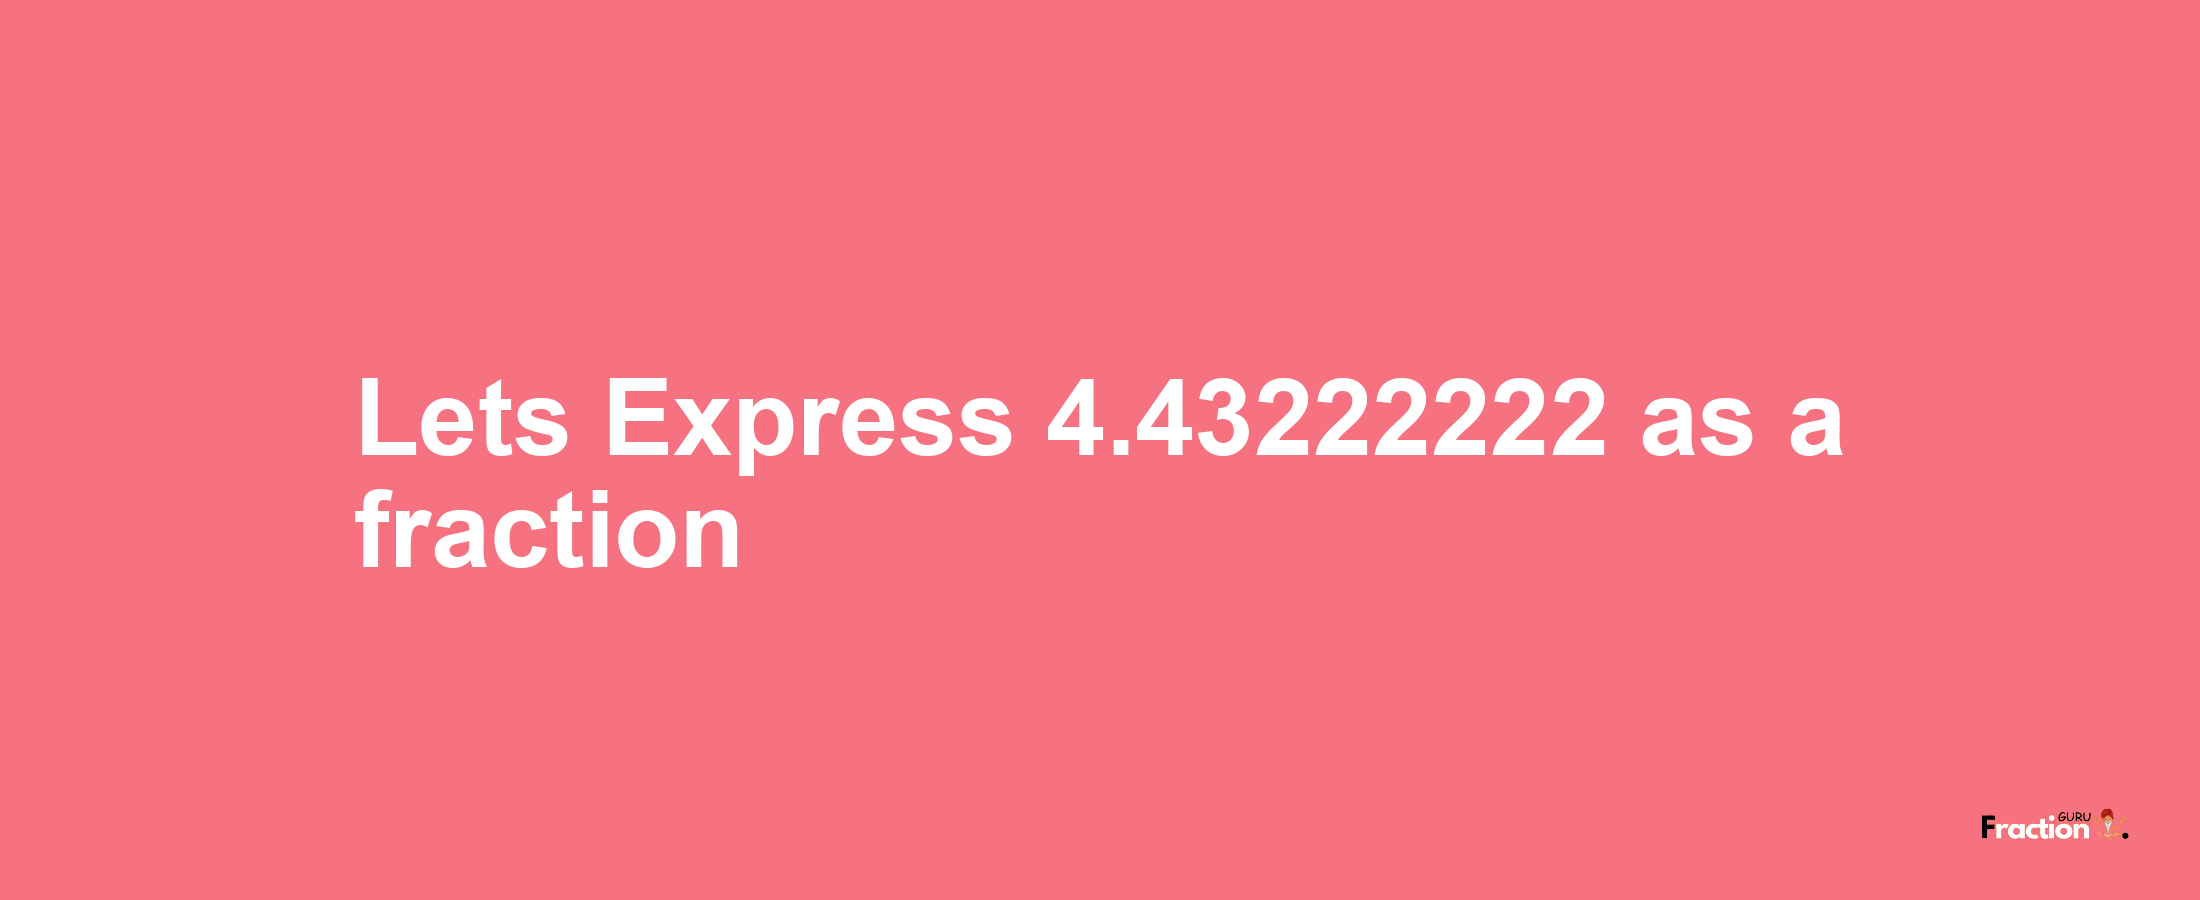 Lets Express 4.43222222 as afraction